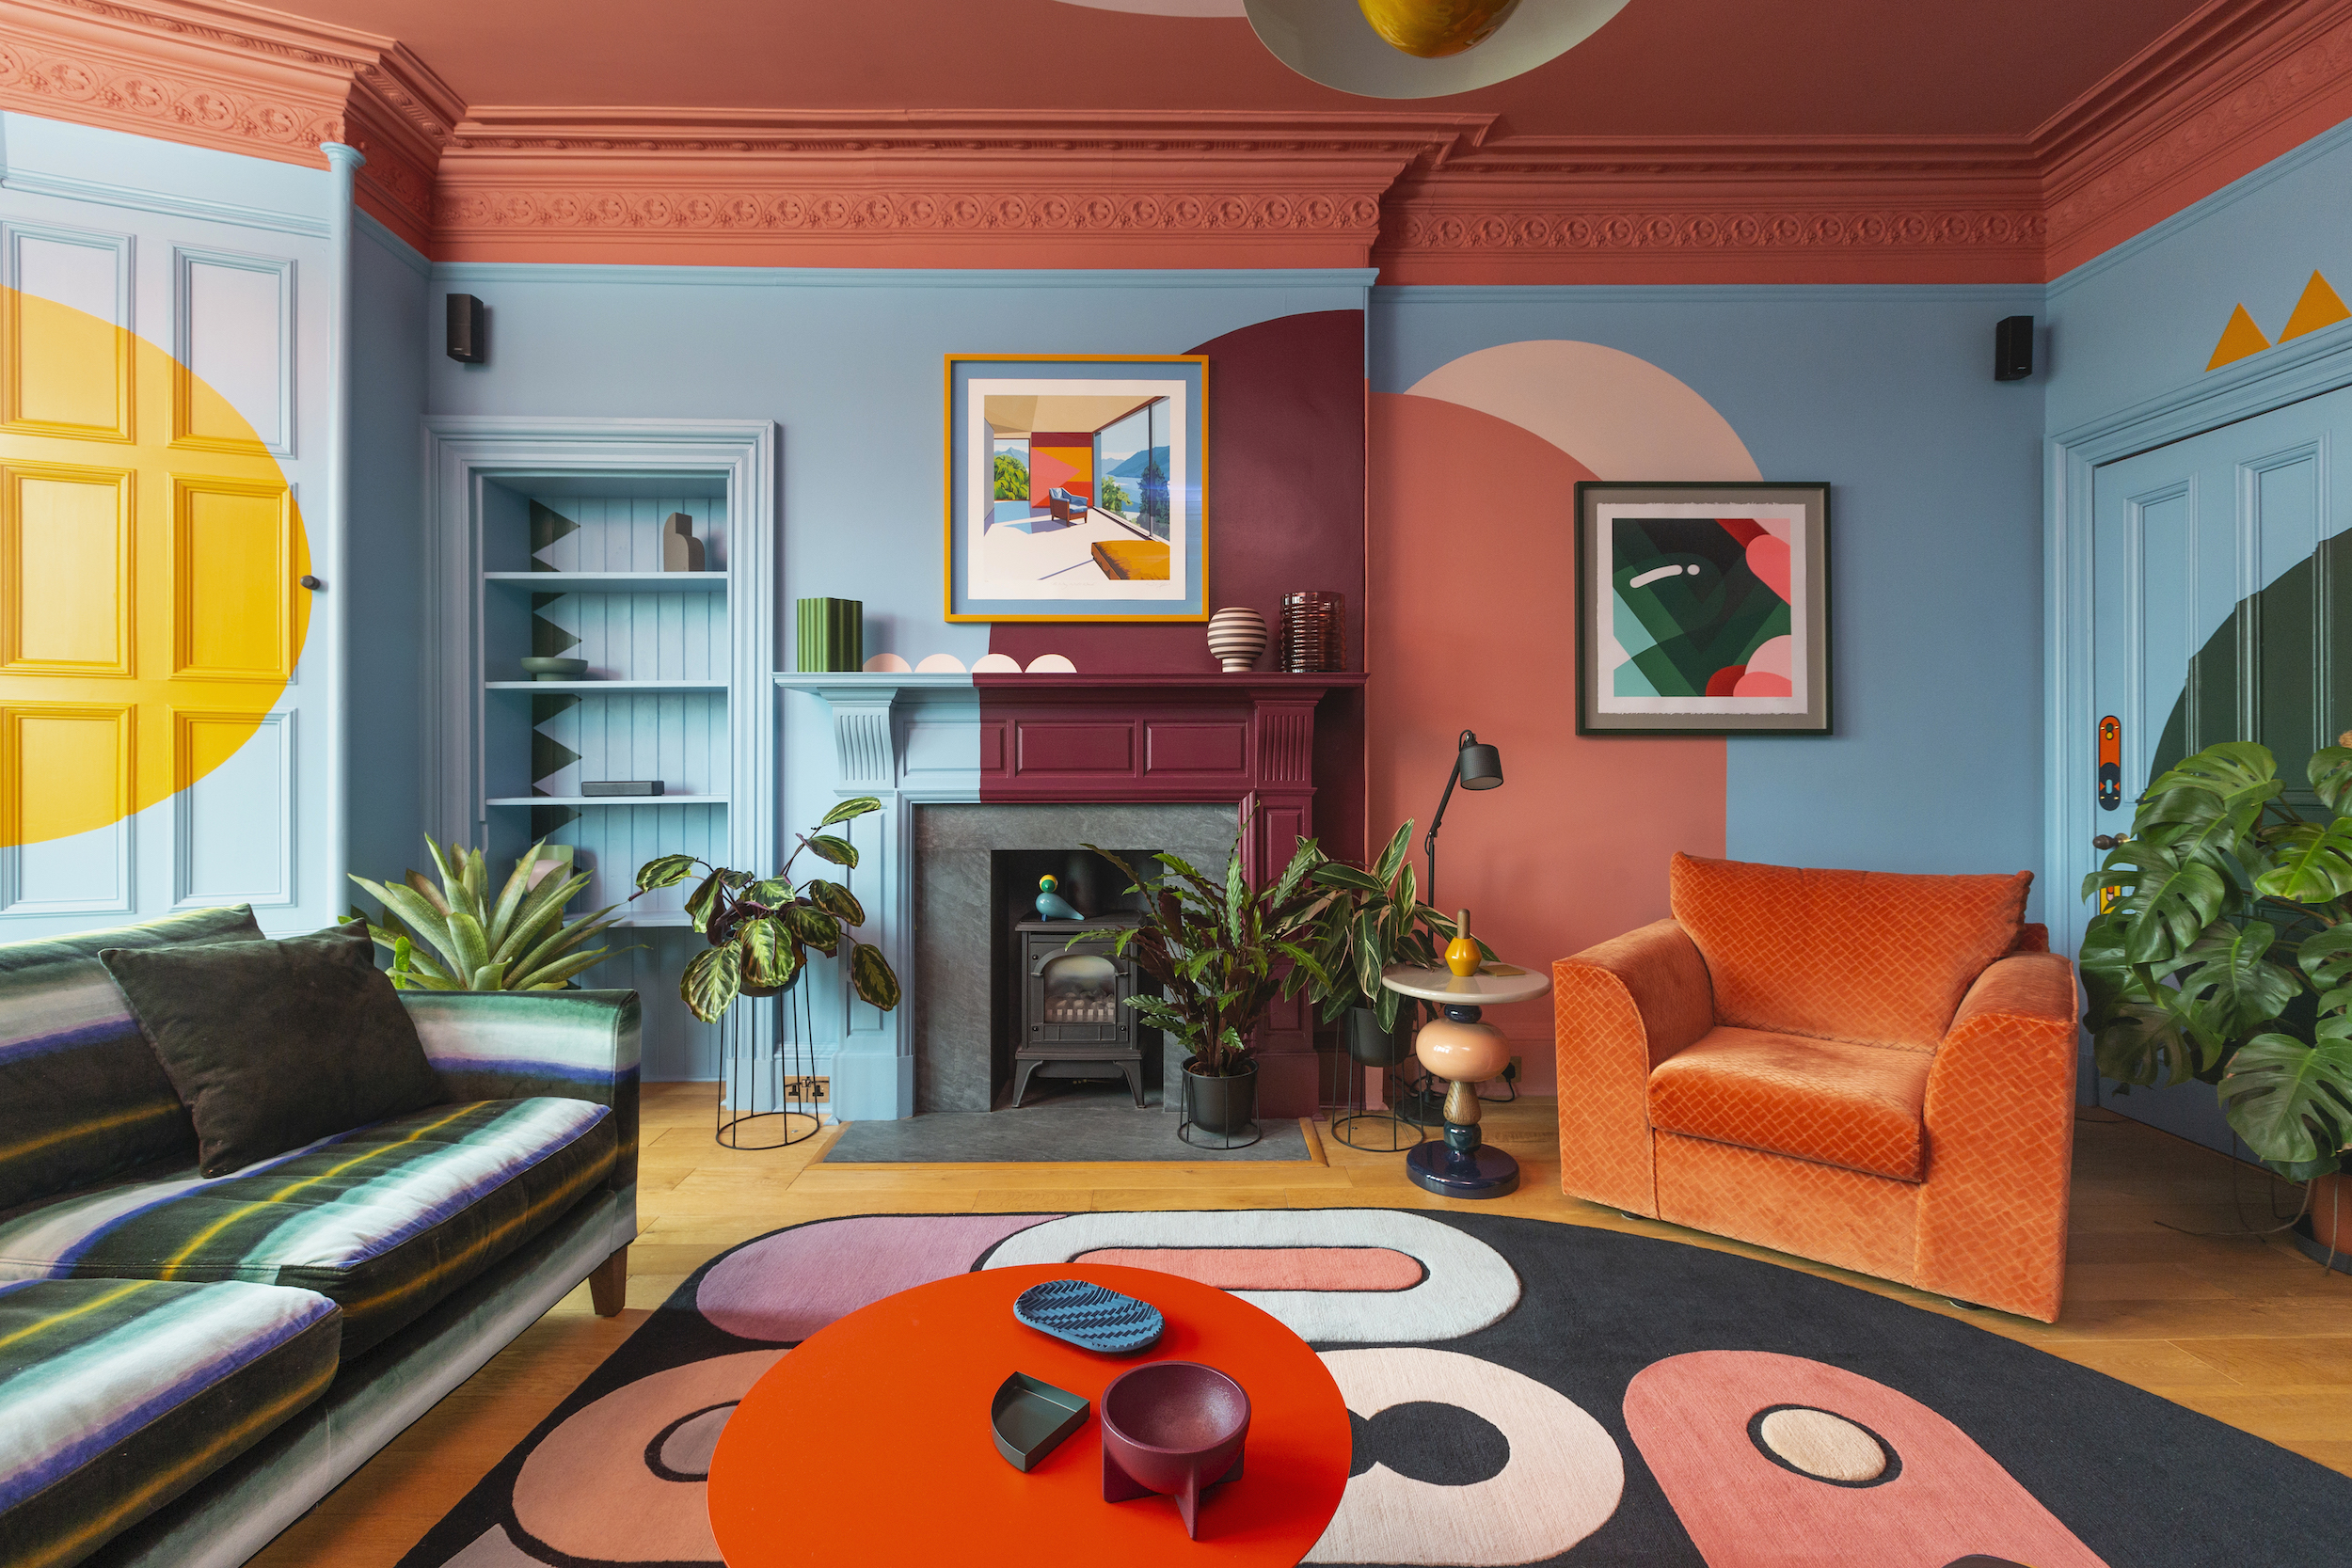 Bold use of colour like this Edinburgh interior by Sam Buckley is one of this year's key summer interior design trends